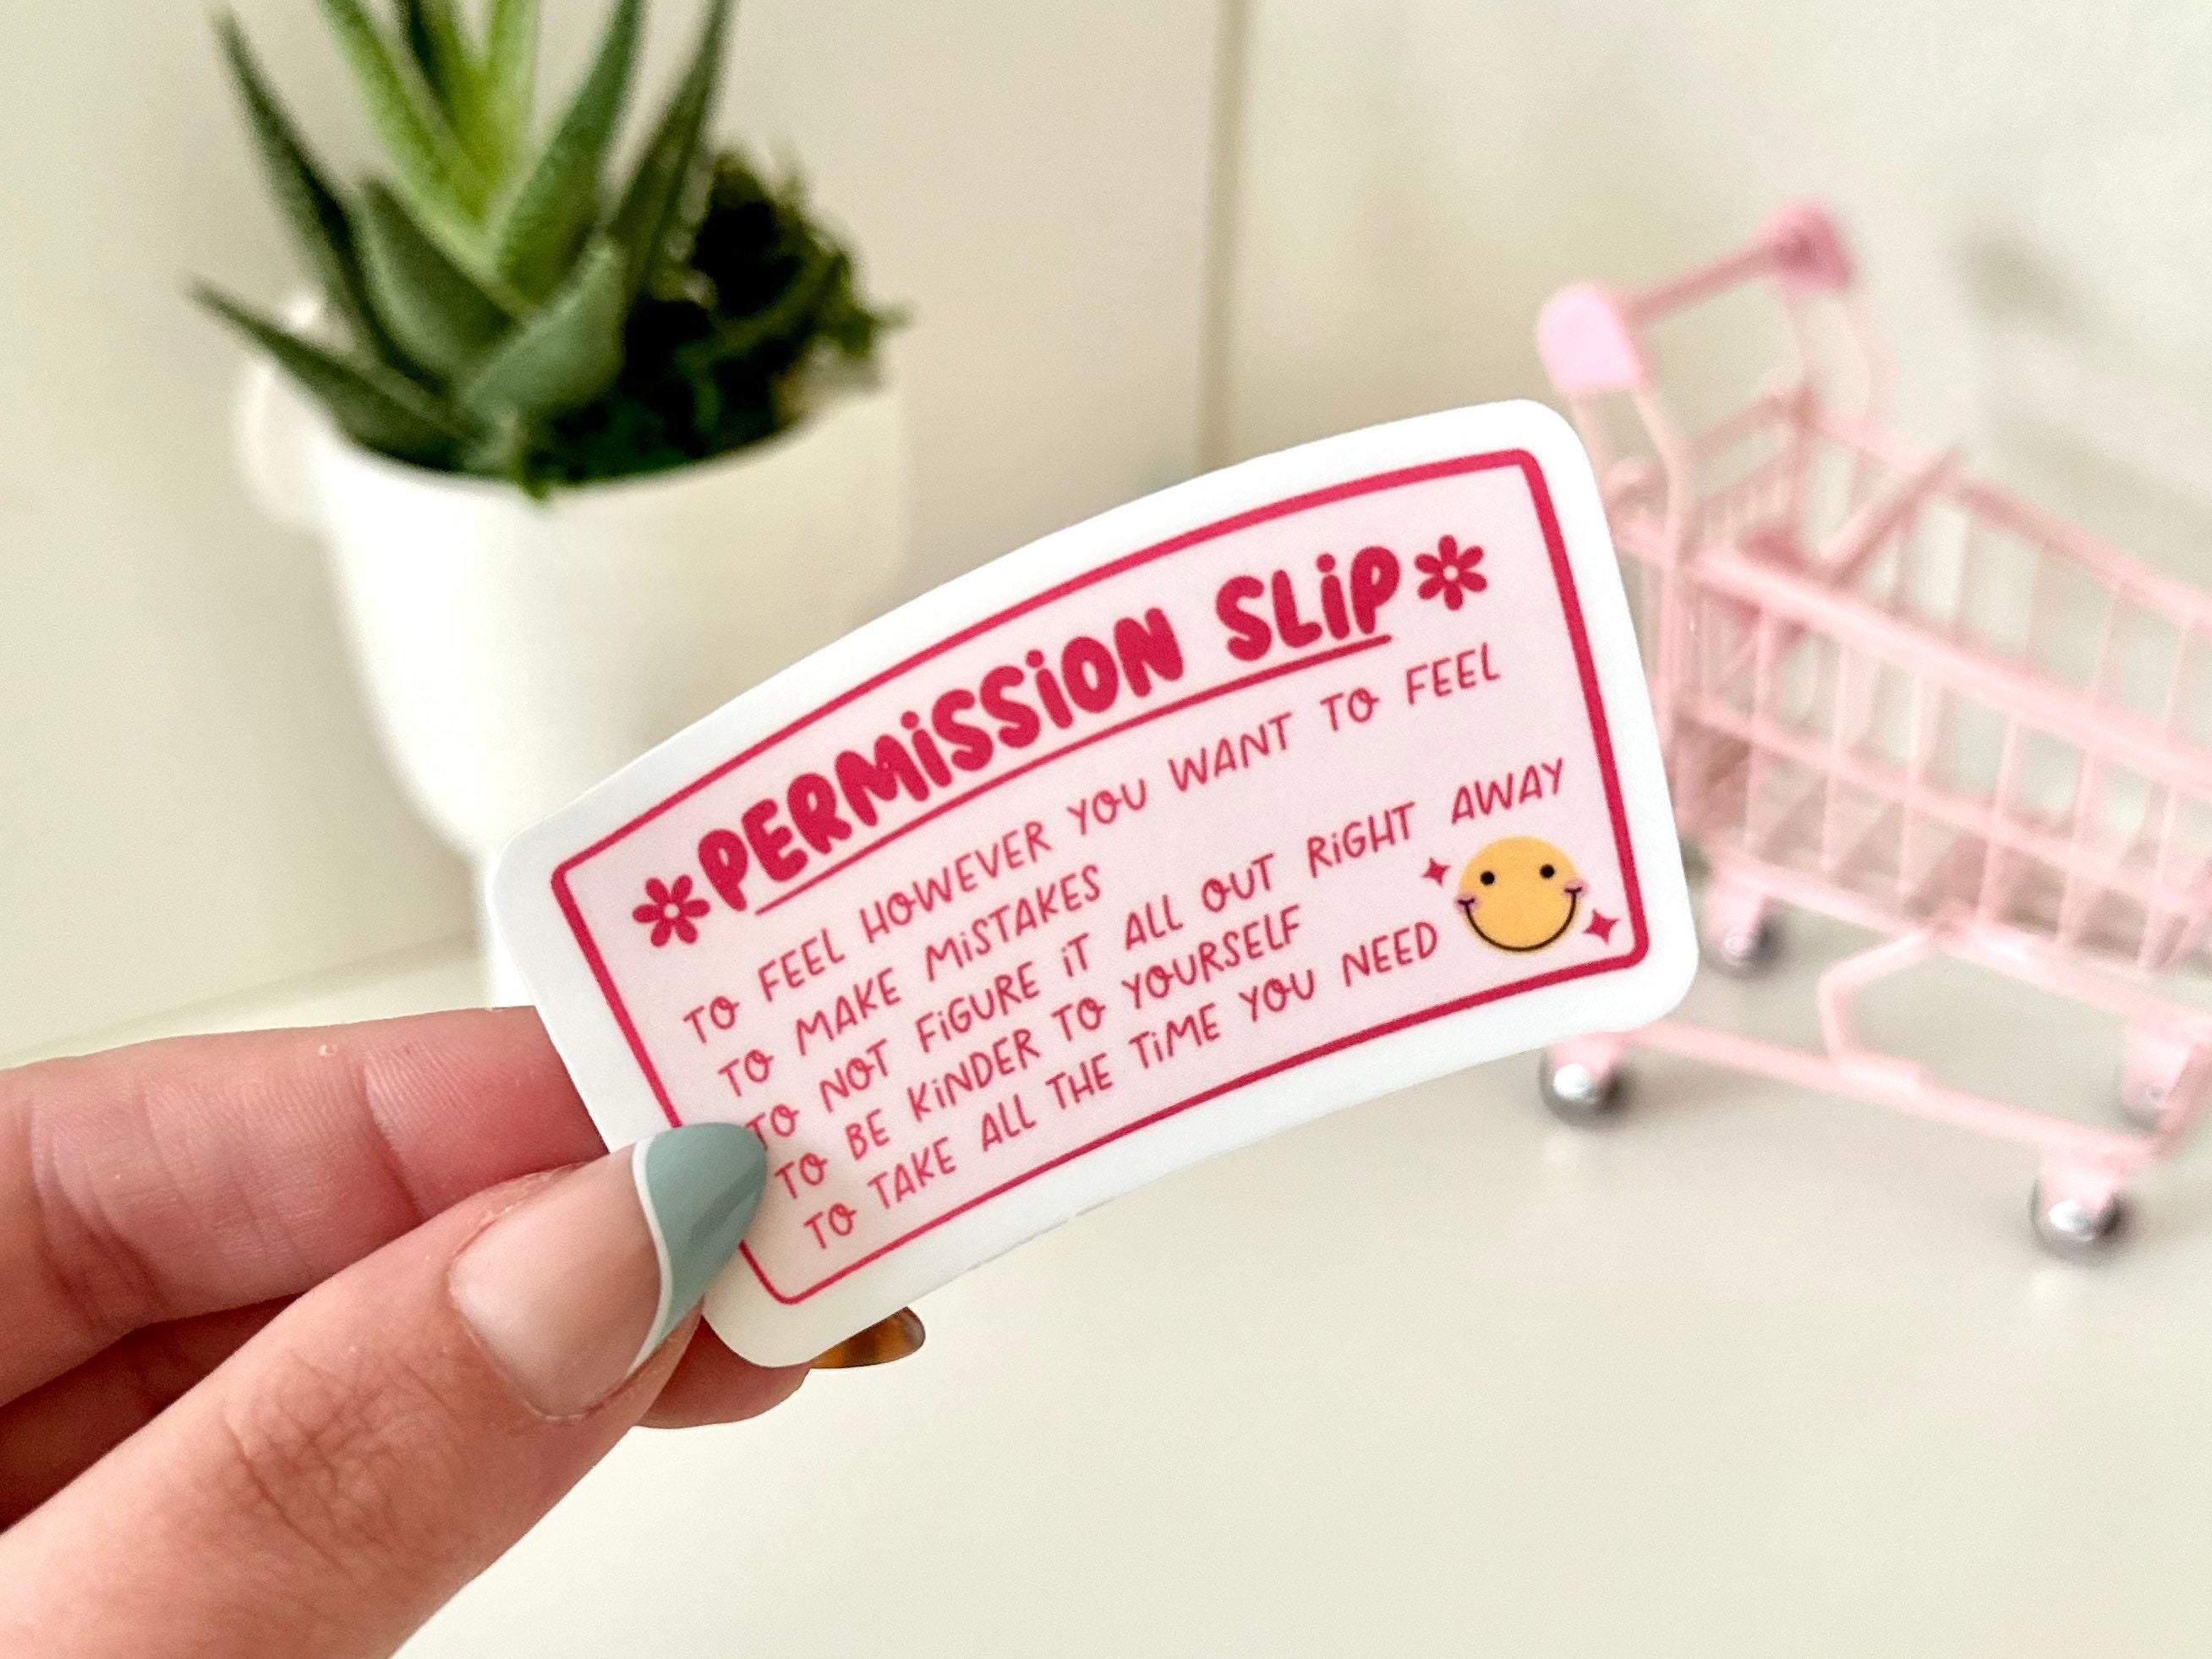 Permission Slip Waterproof Sticker, Mental Health Stickers, Therapy Sticker, Trauma Sticker, Things You Need to Hear